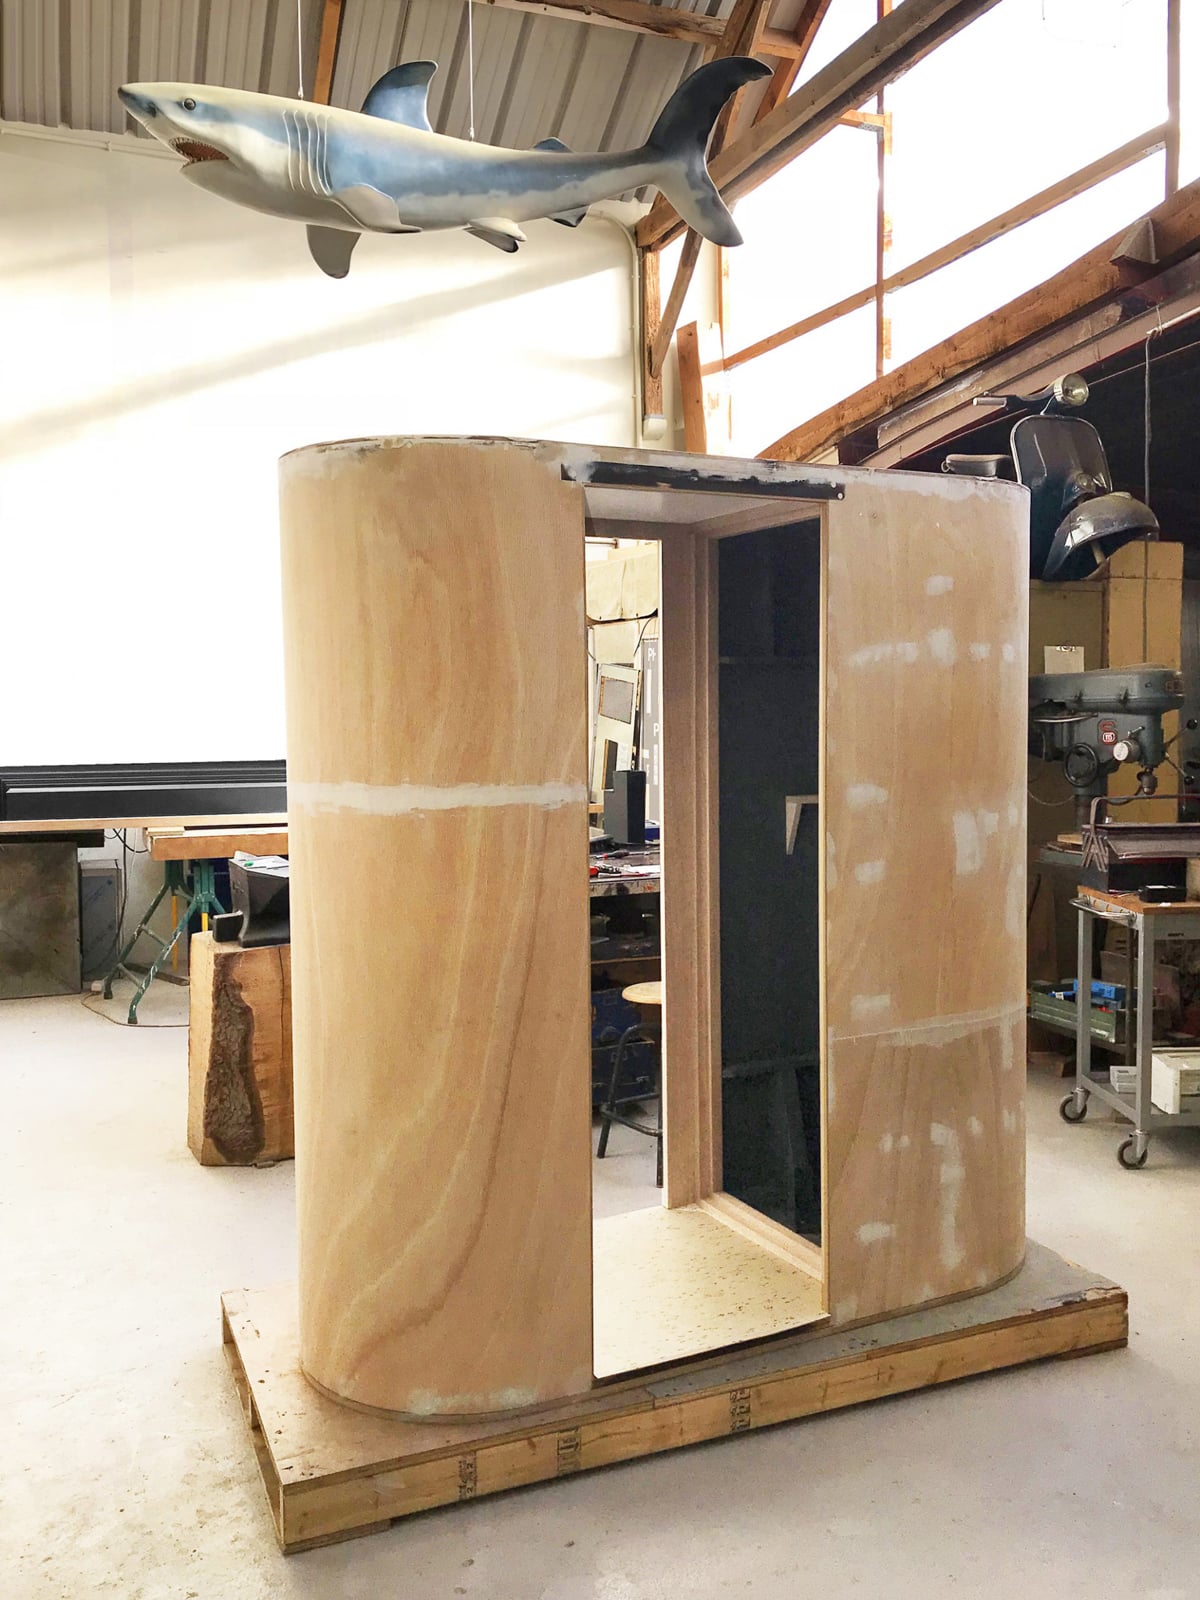 wooden photo booth under construction in a workshop with a suspended shark